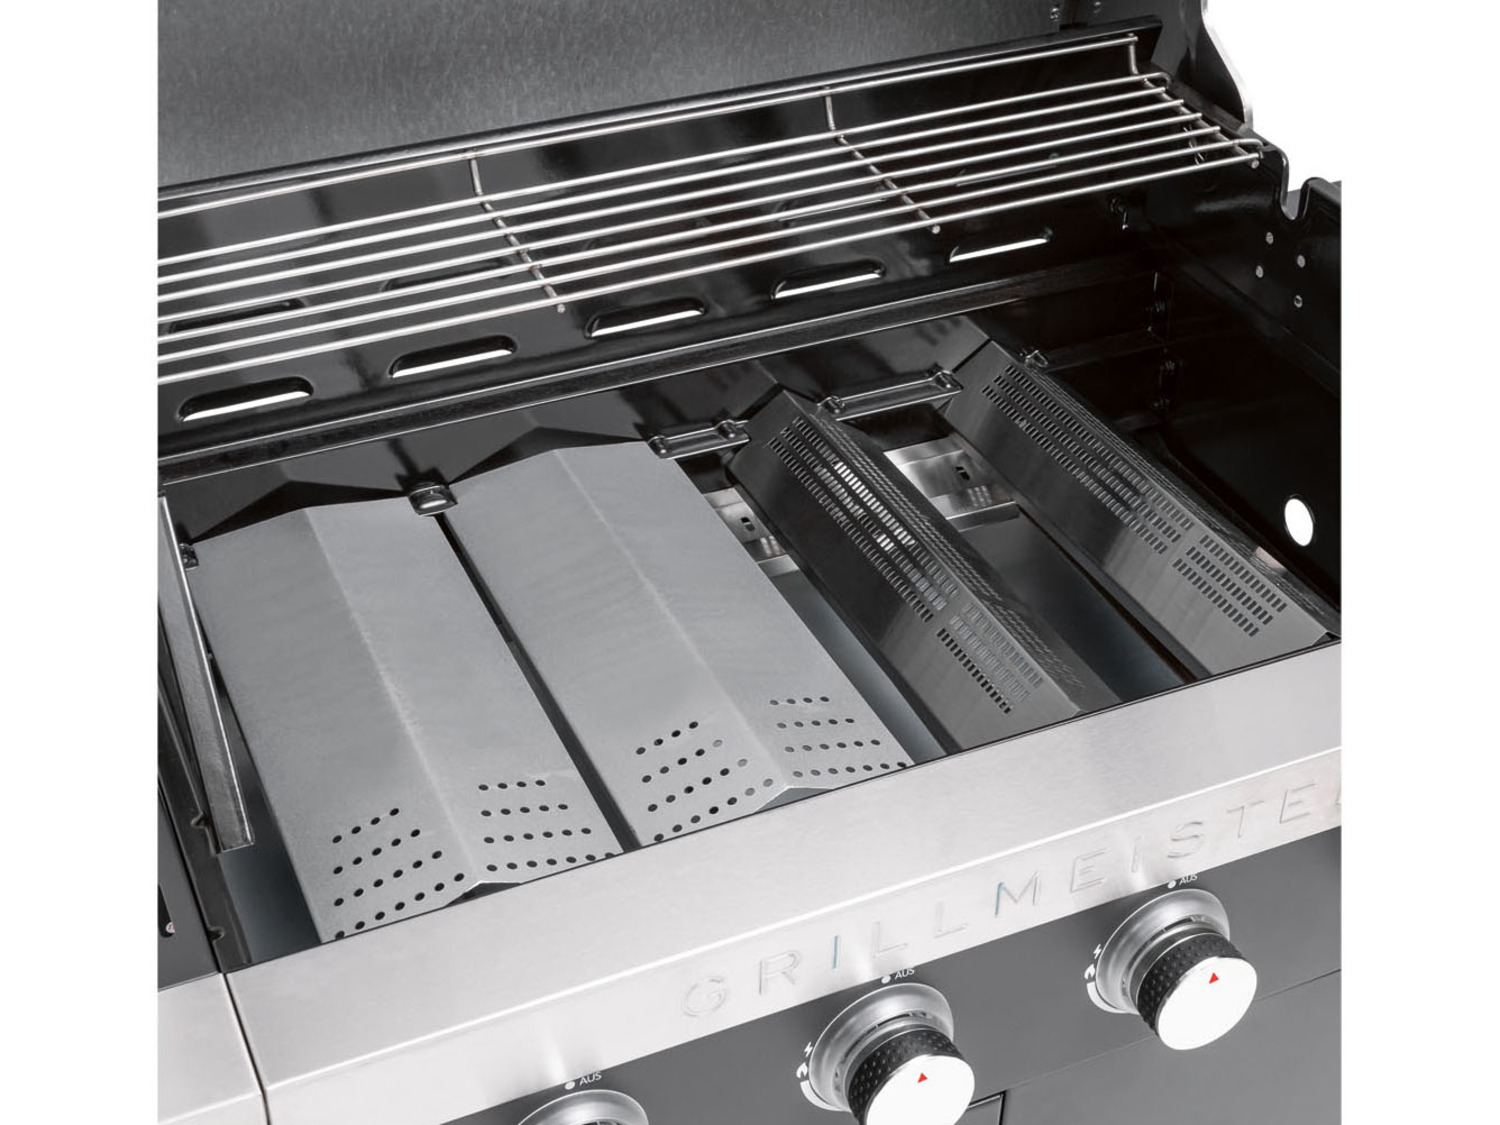 GRILLMEISTER Gasgrill, 4plus1 Brenner, 19,7 | kW LIDL